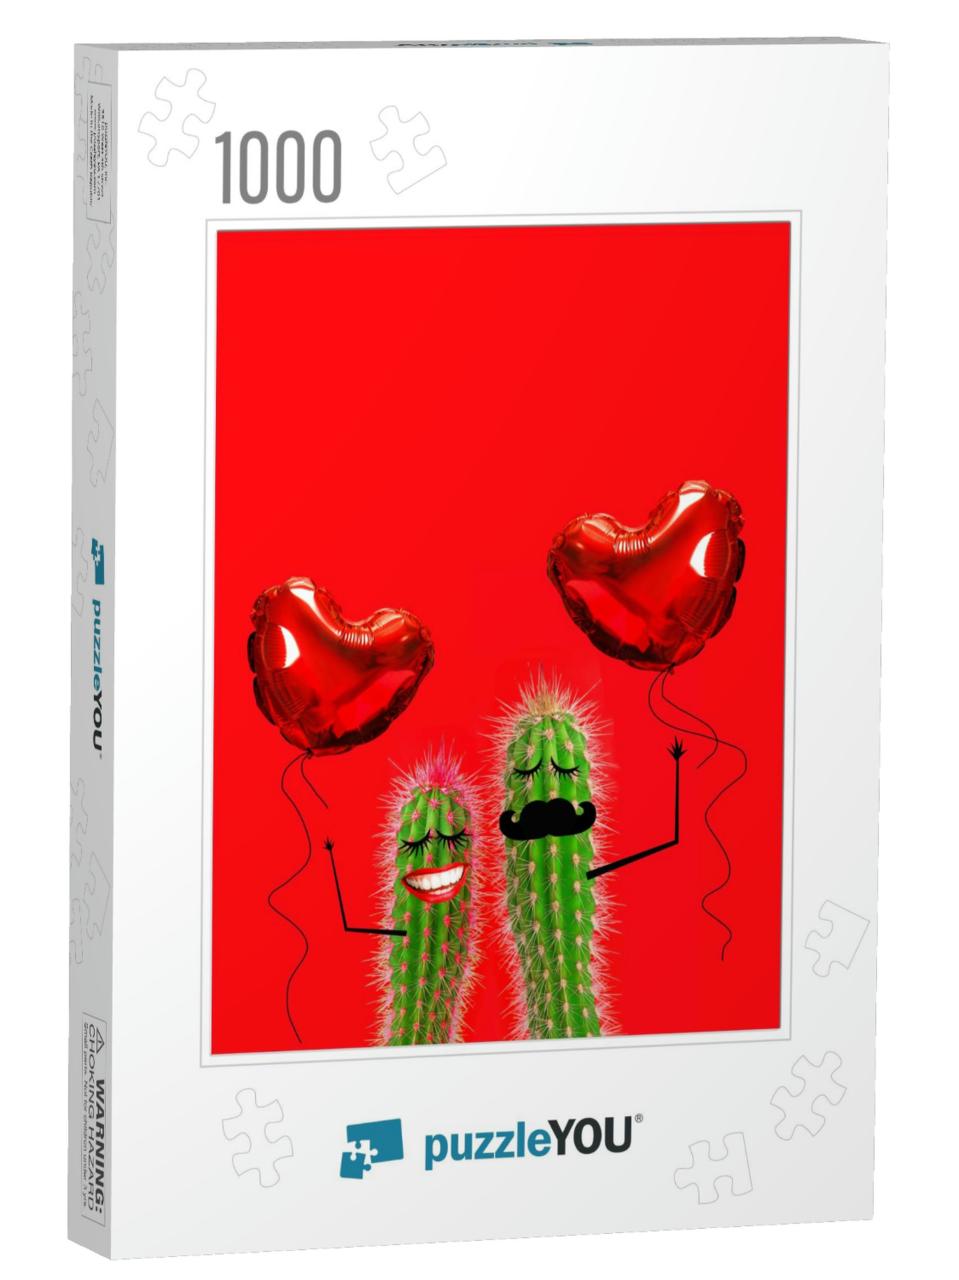 Valentines Day. Cactus Couple with Heart Balloons in Love... Jigsaw Puzzle with 1000 pieces